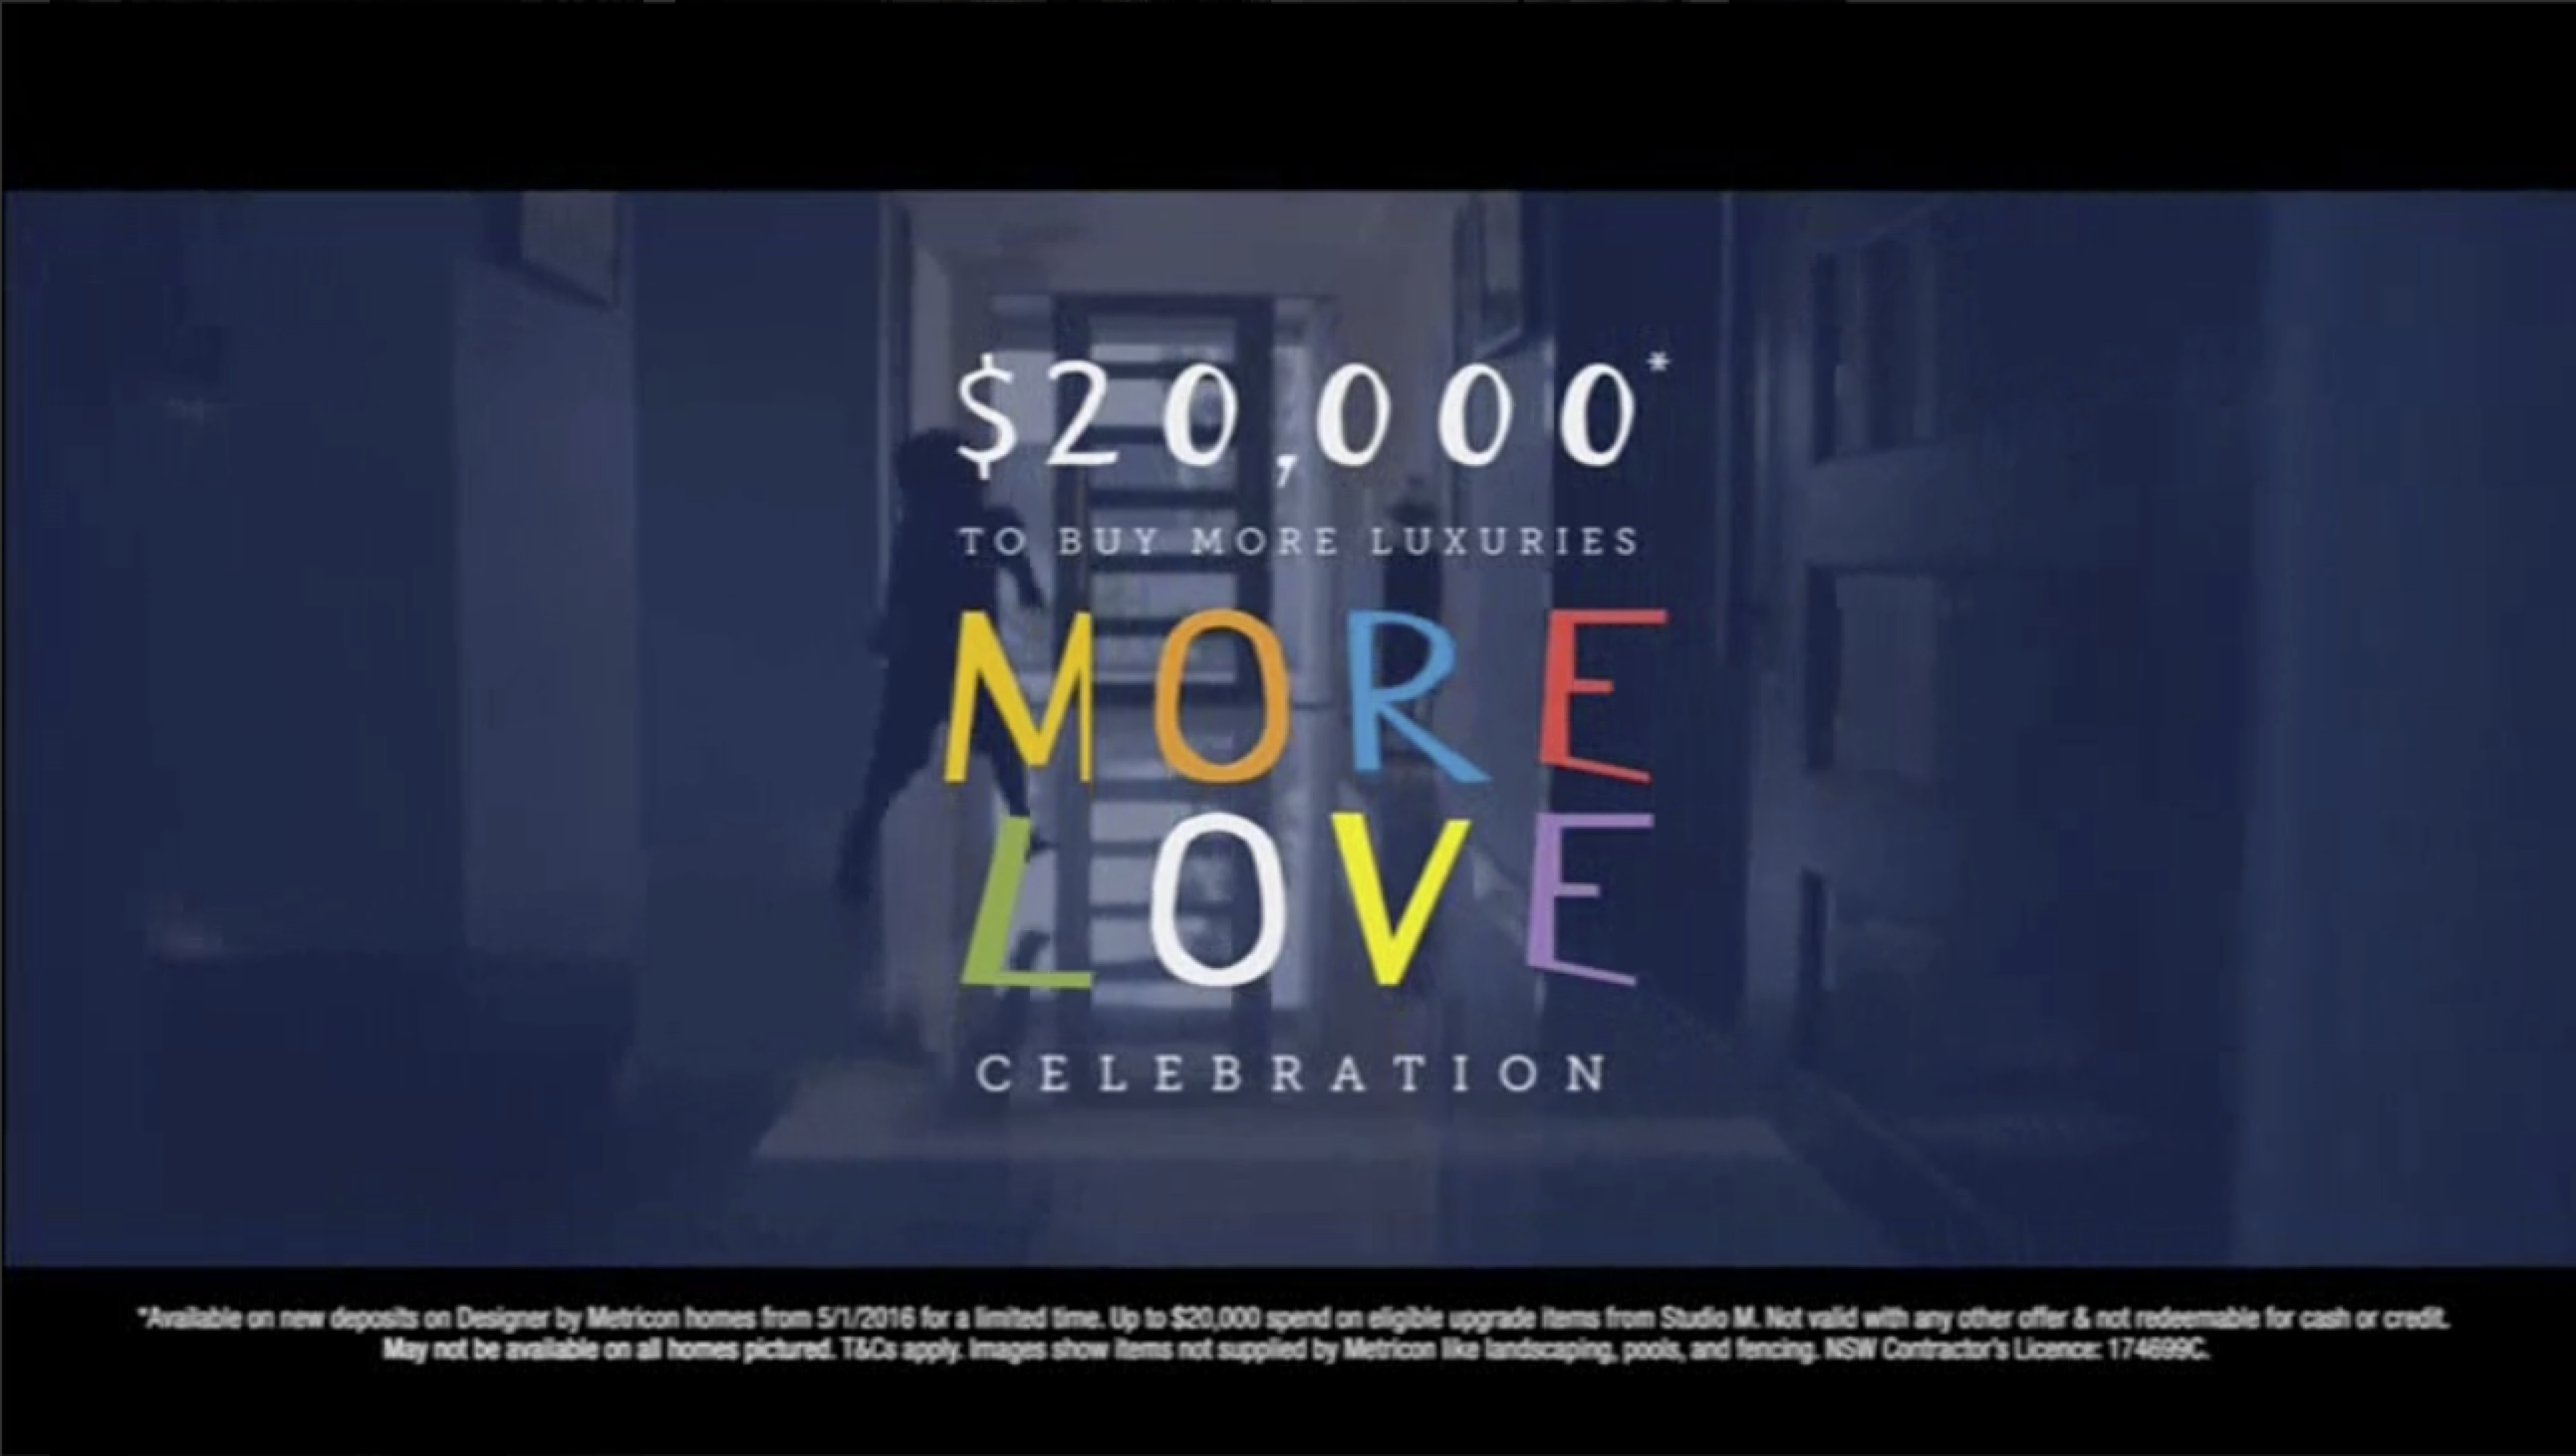 Metricon’s “More love celebration” campaign offered $20,000 towards extra luxuries.